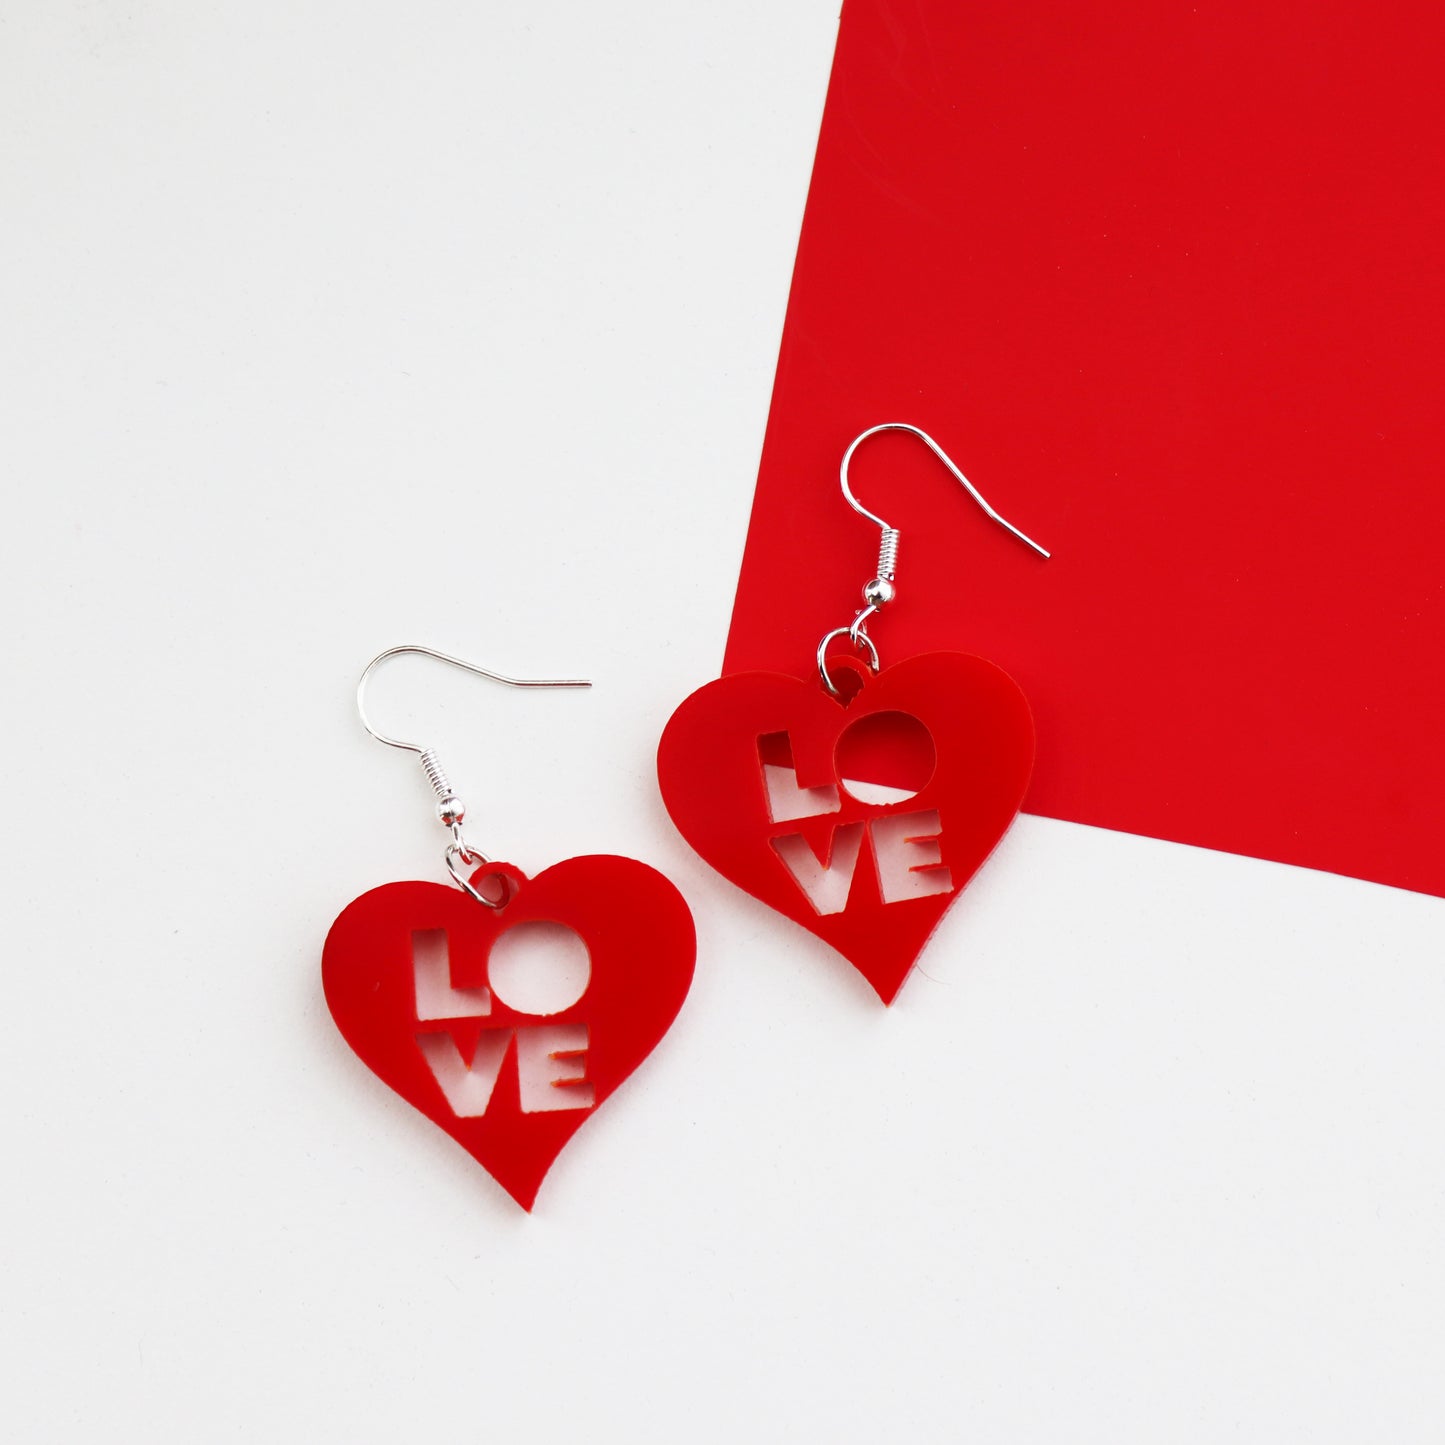 red laser cut acrylic heart earrings with love cut out from the centre shown on a red and white background